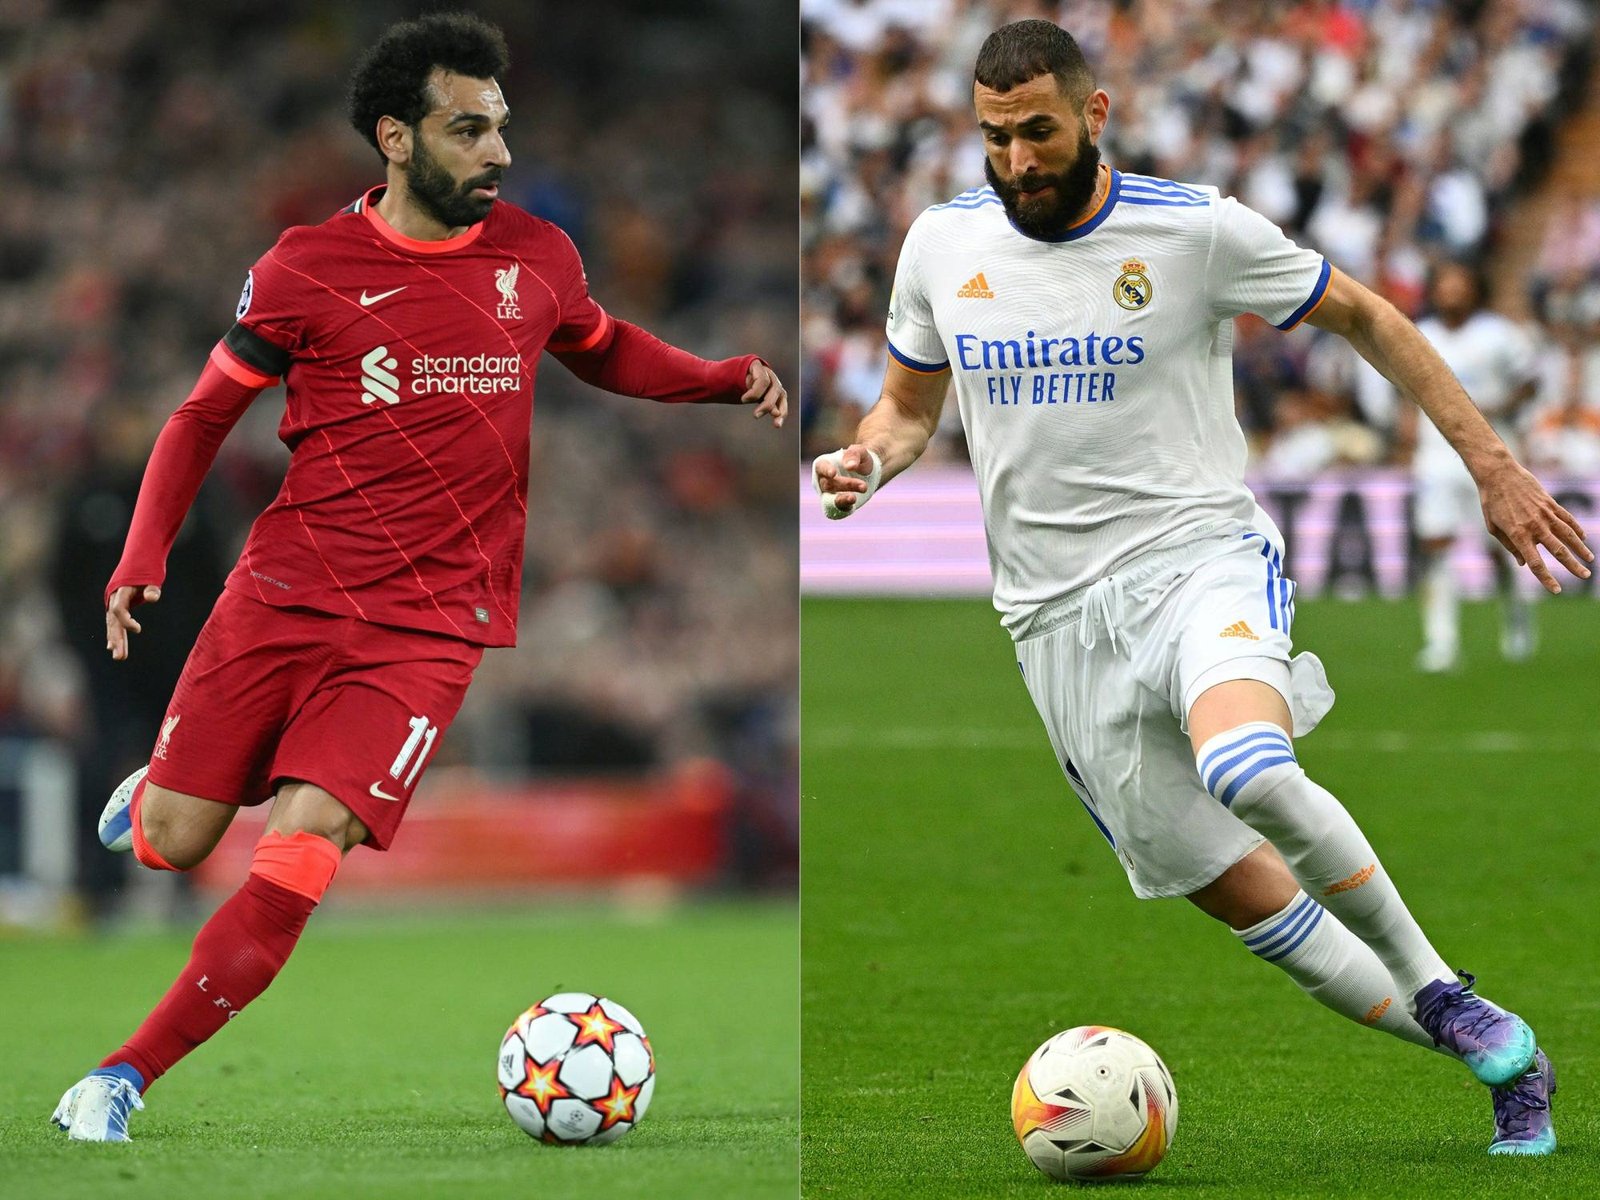 COMBO-FILES-FBL-EUR-C1-LIVERPOOL-REAL MADRID